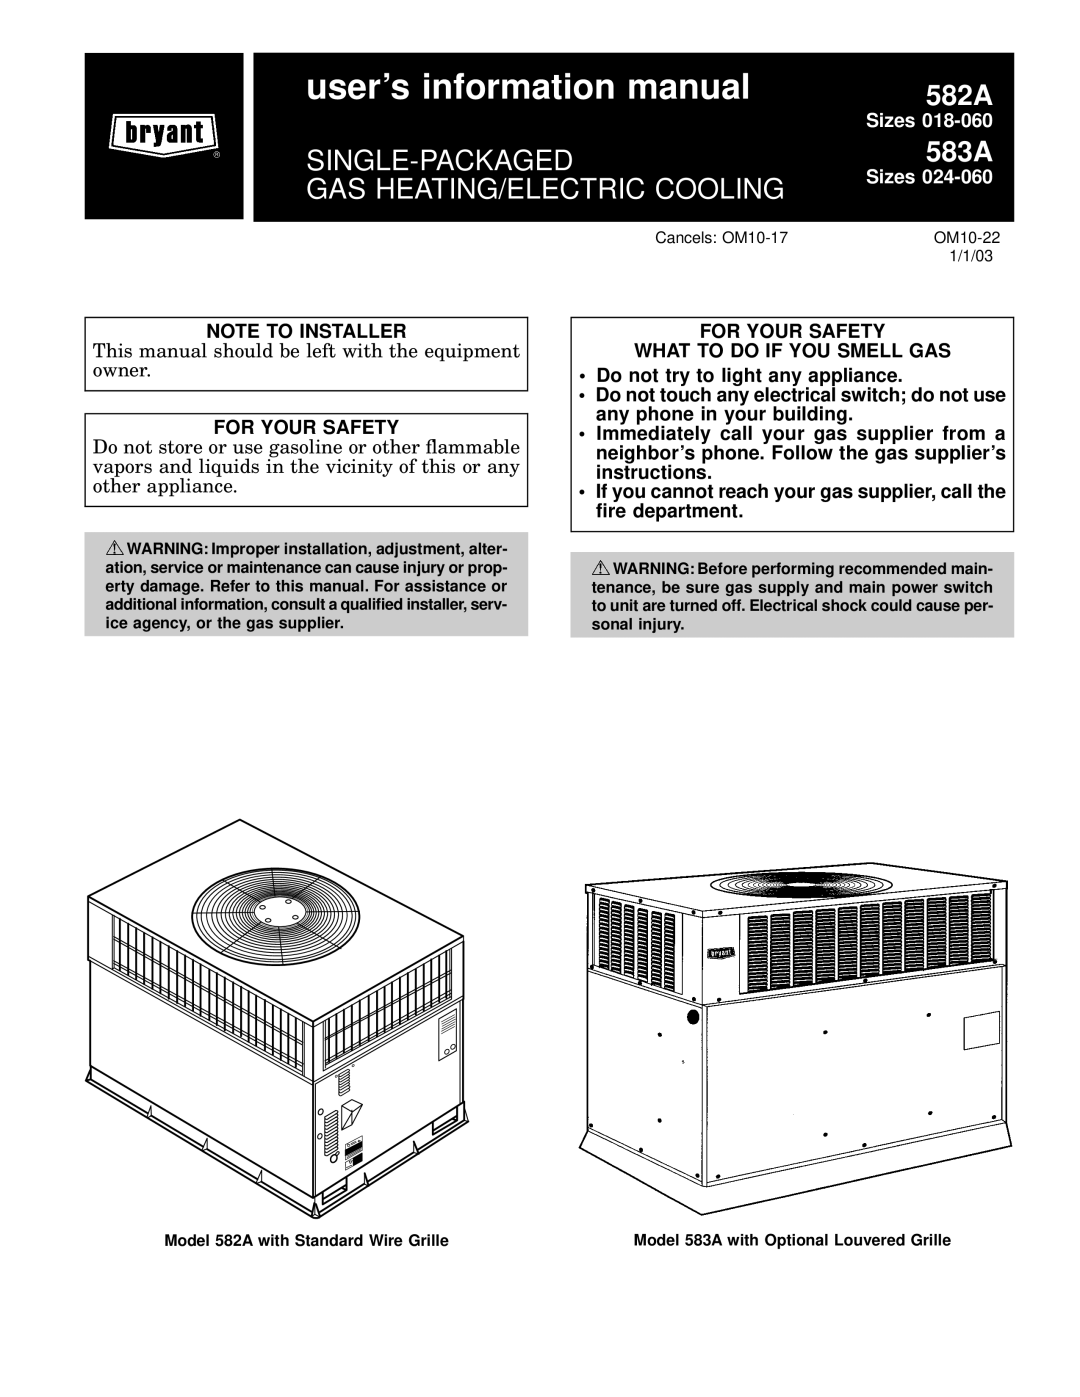 Bryant 583A manual users information manual, 582A, Single-Packaged, Gas Heating/Electric Cooling, Sizes 